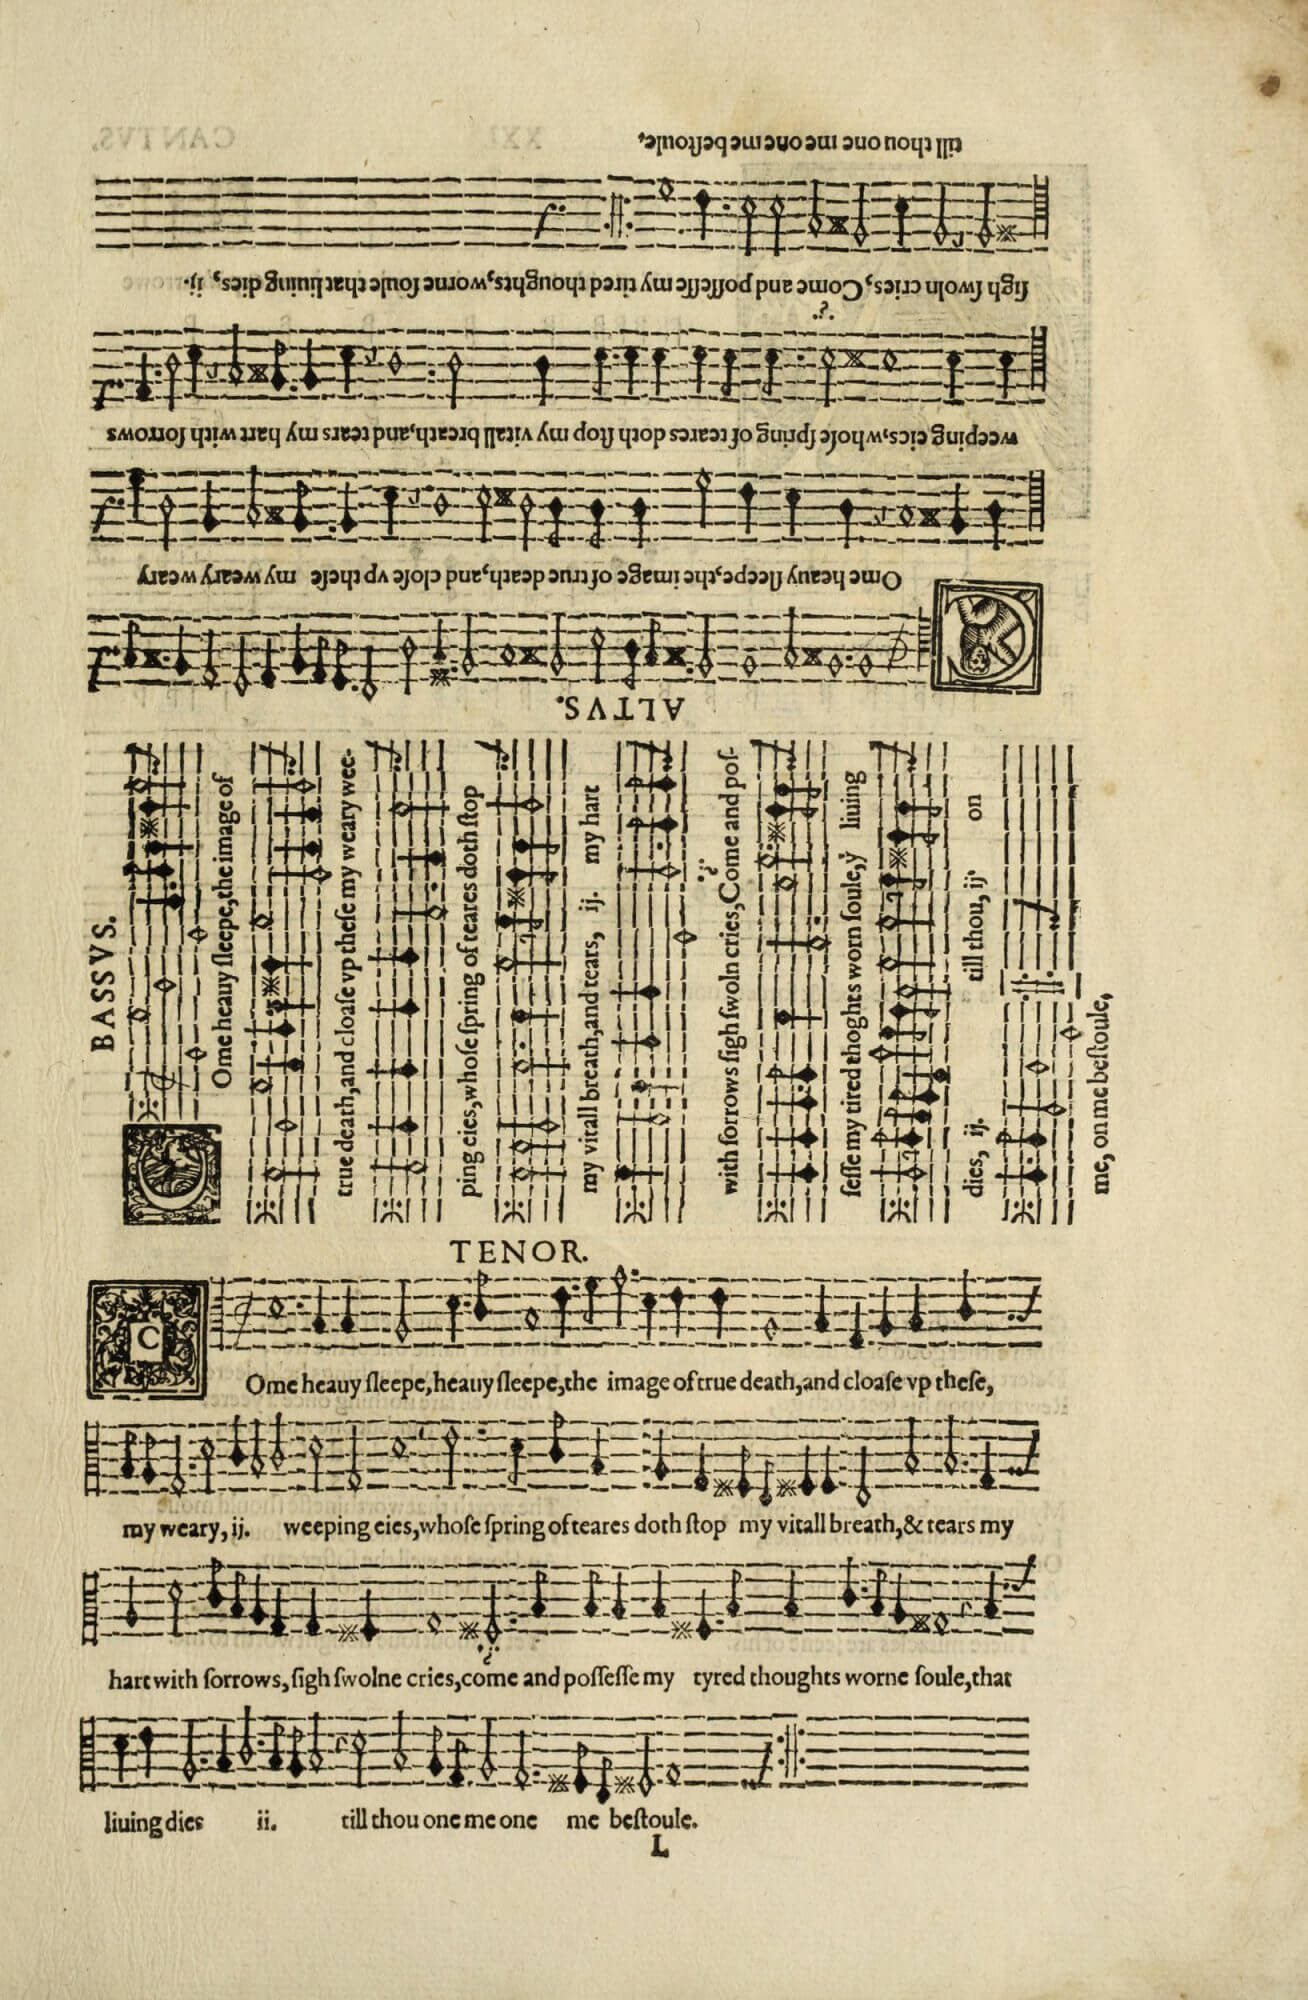 This page of music was printed so that four musicians could stand around a table sharing the book. The music itself was printed from tiny pieces of metal type, each with the 5 bars of the staff and a note; lined up in a series, the pieces of type formed a series of musical notes.